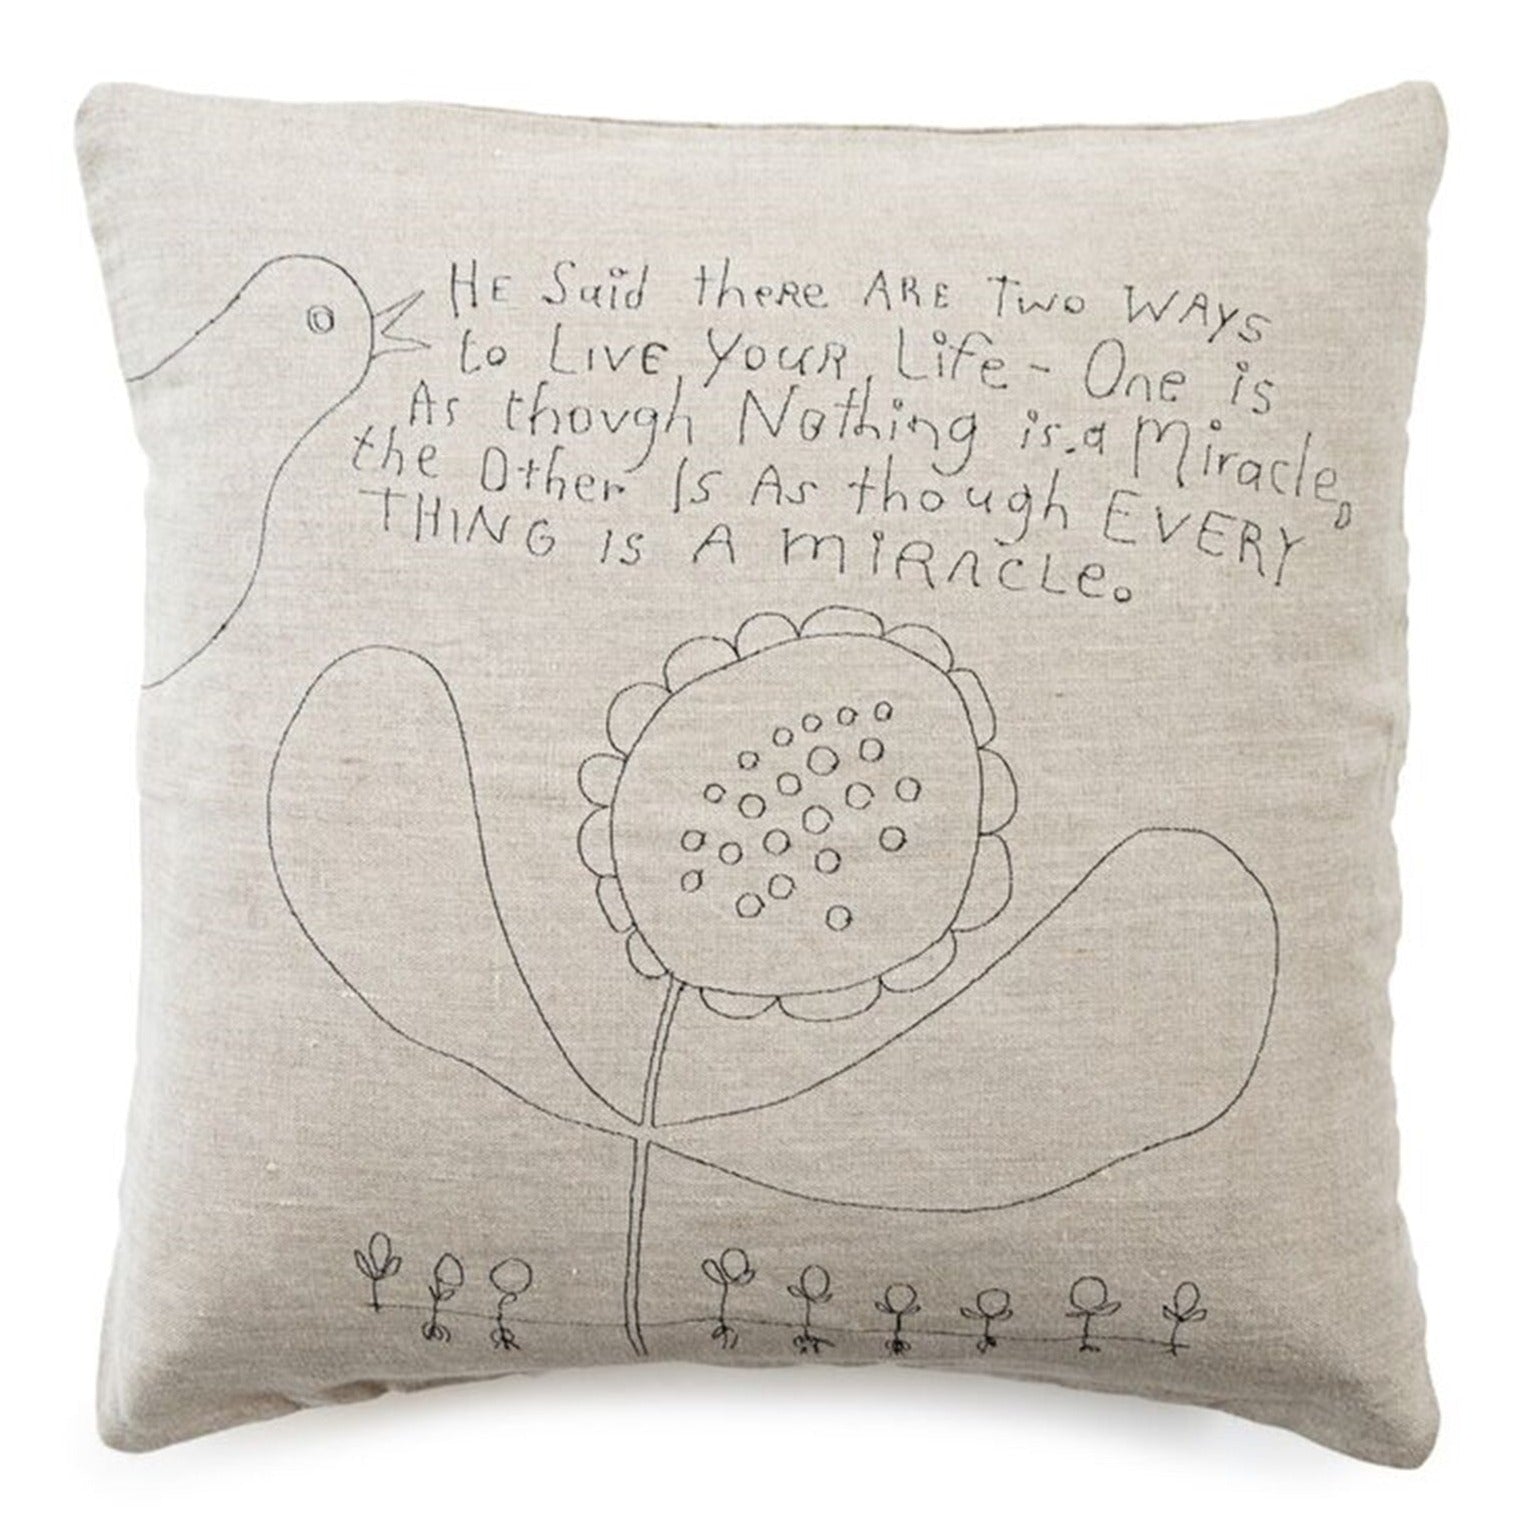 Sugarboo Designs Two Ways To Live Pillow